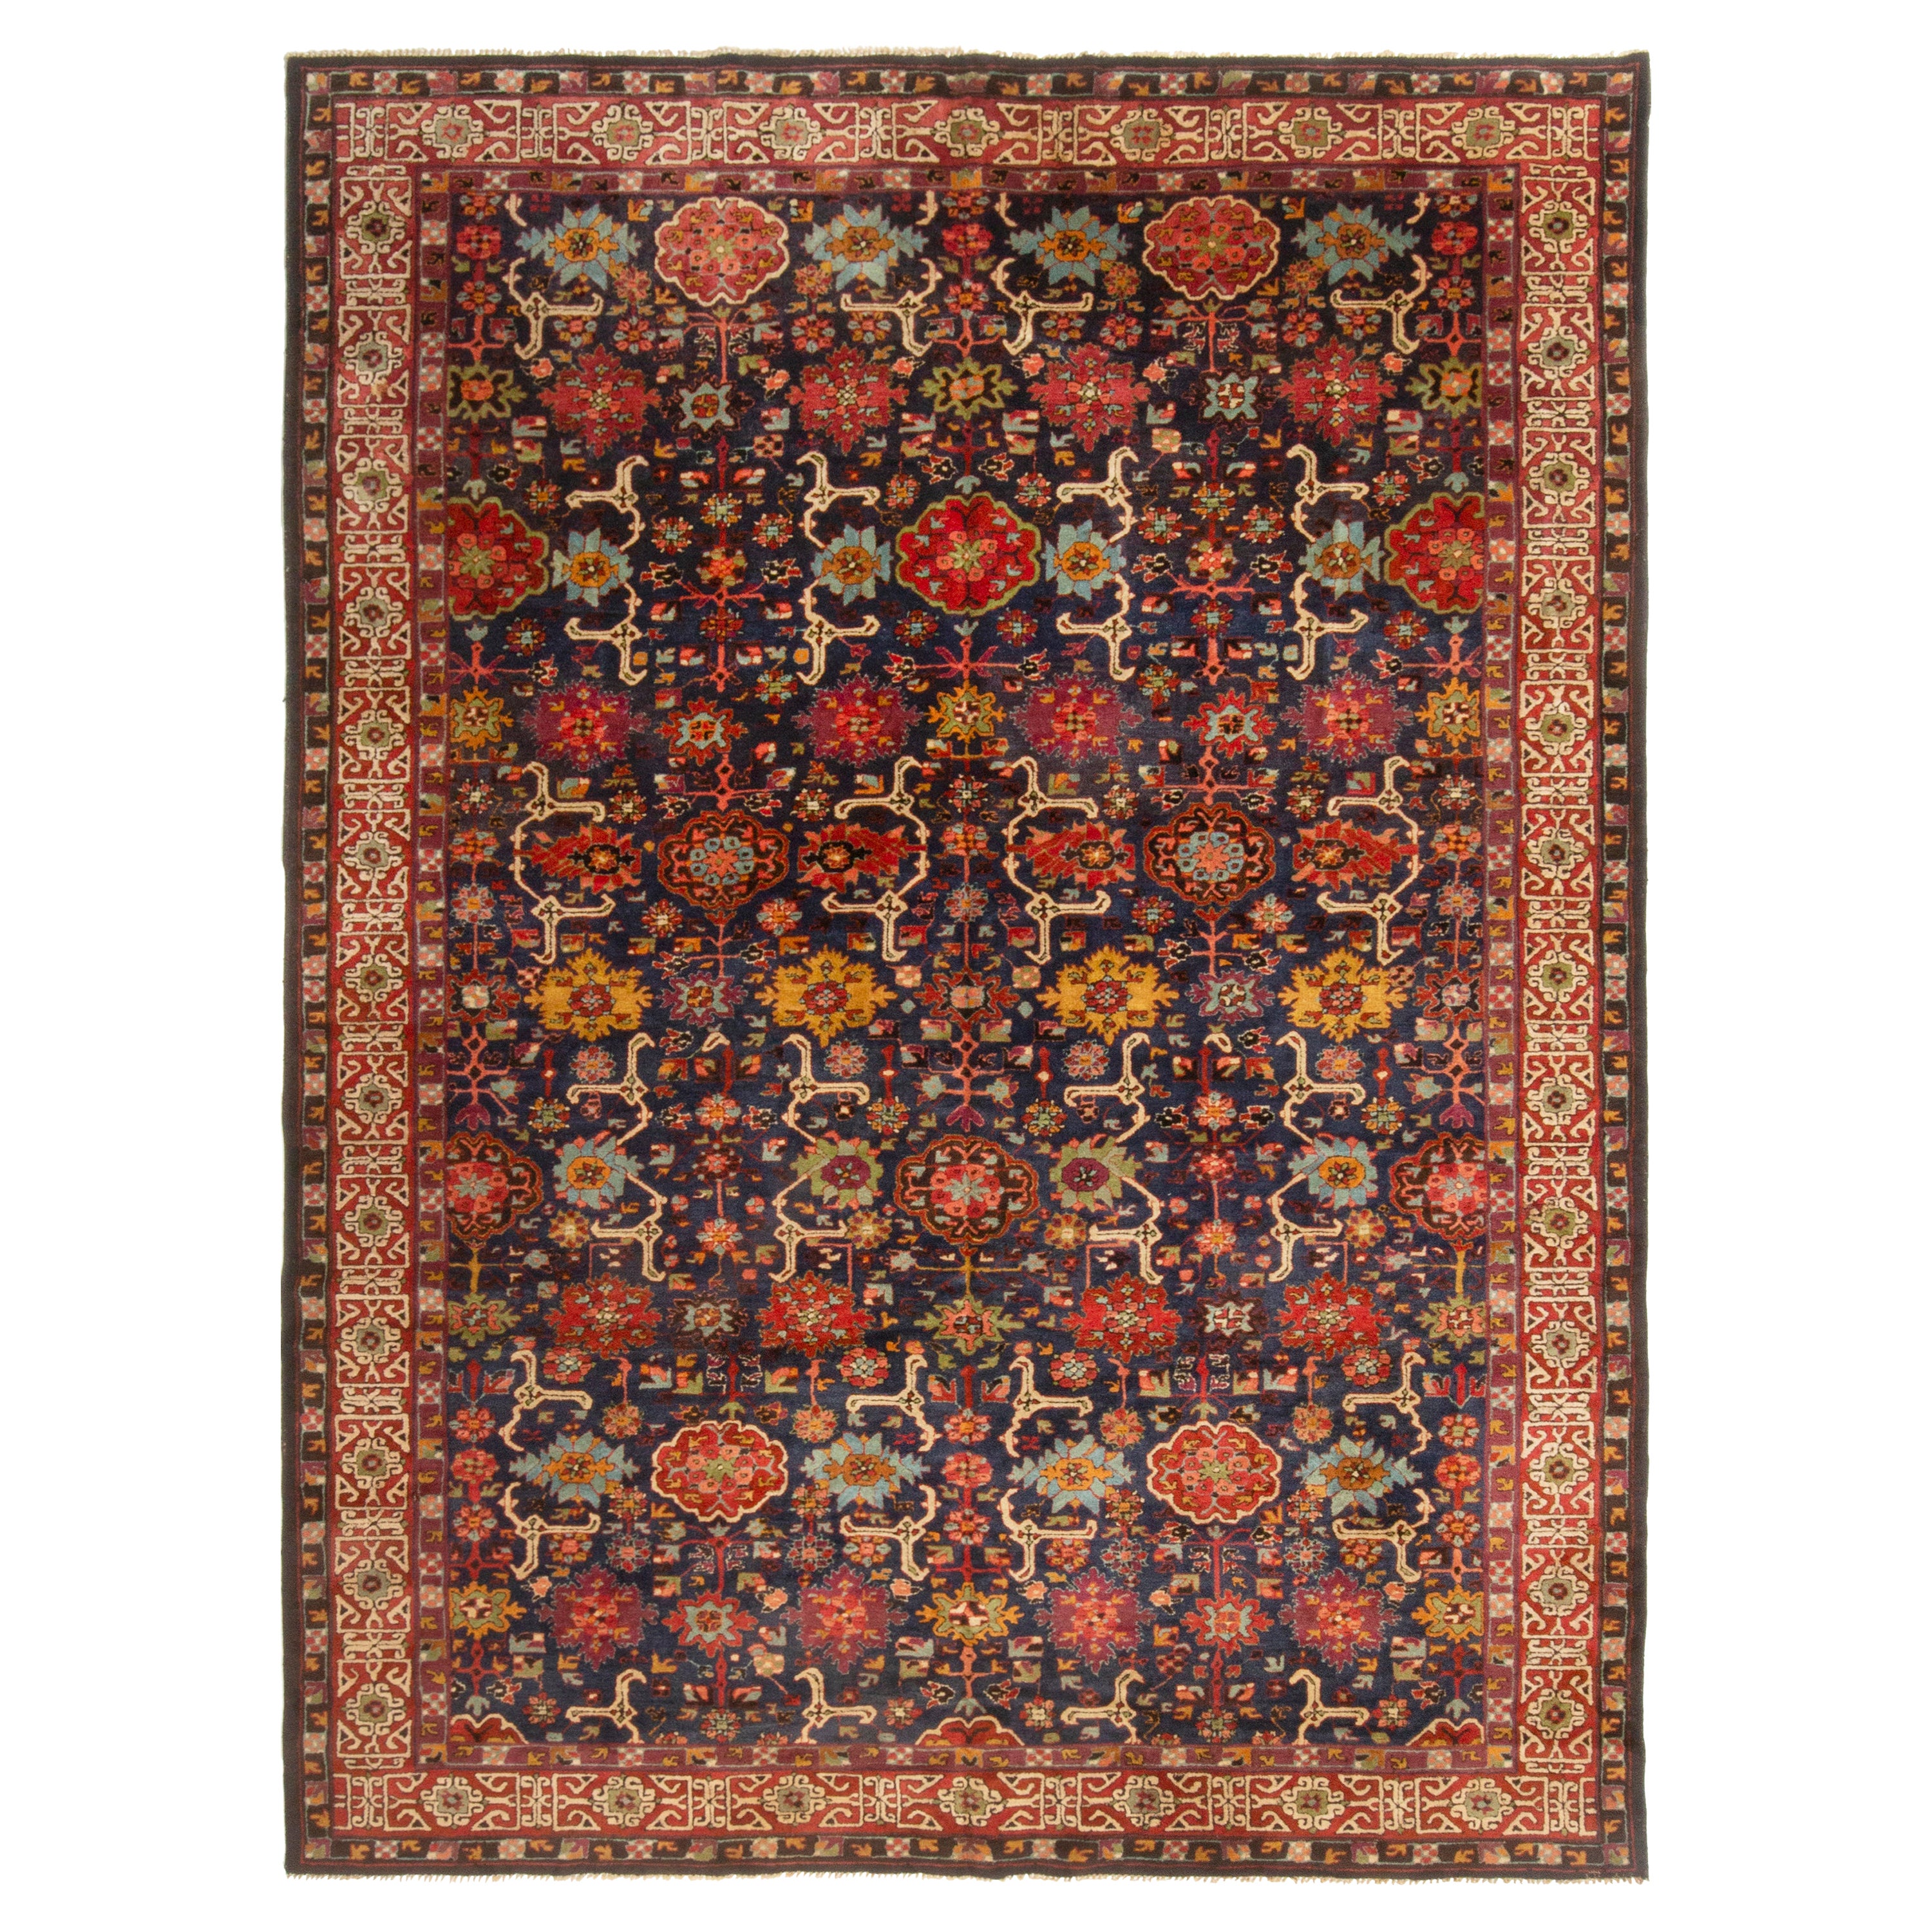 Antique German Blue and Red Rug with Floral Patterns by Rug & Kilim